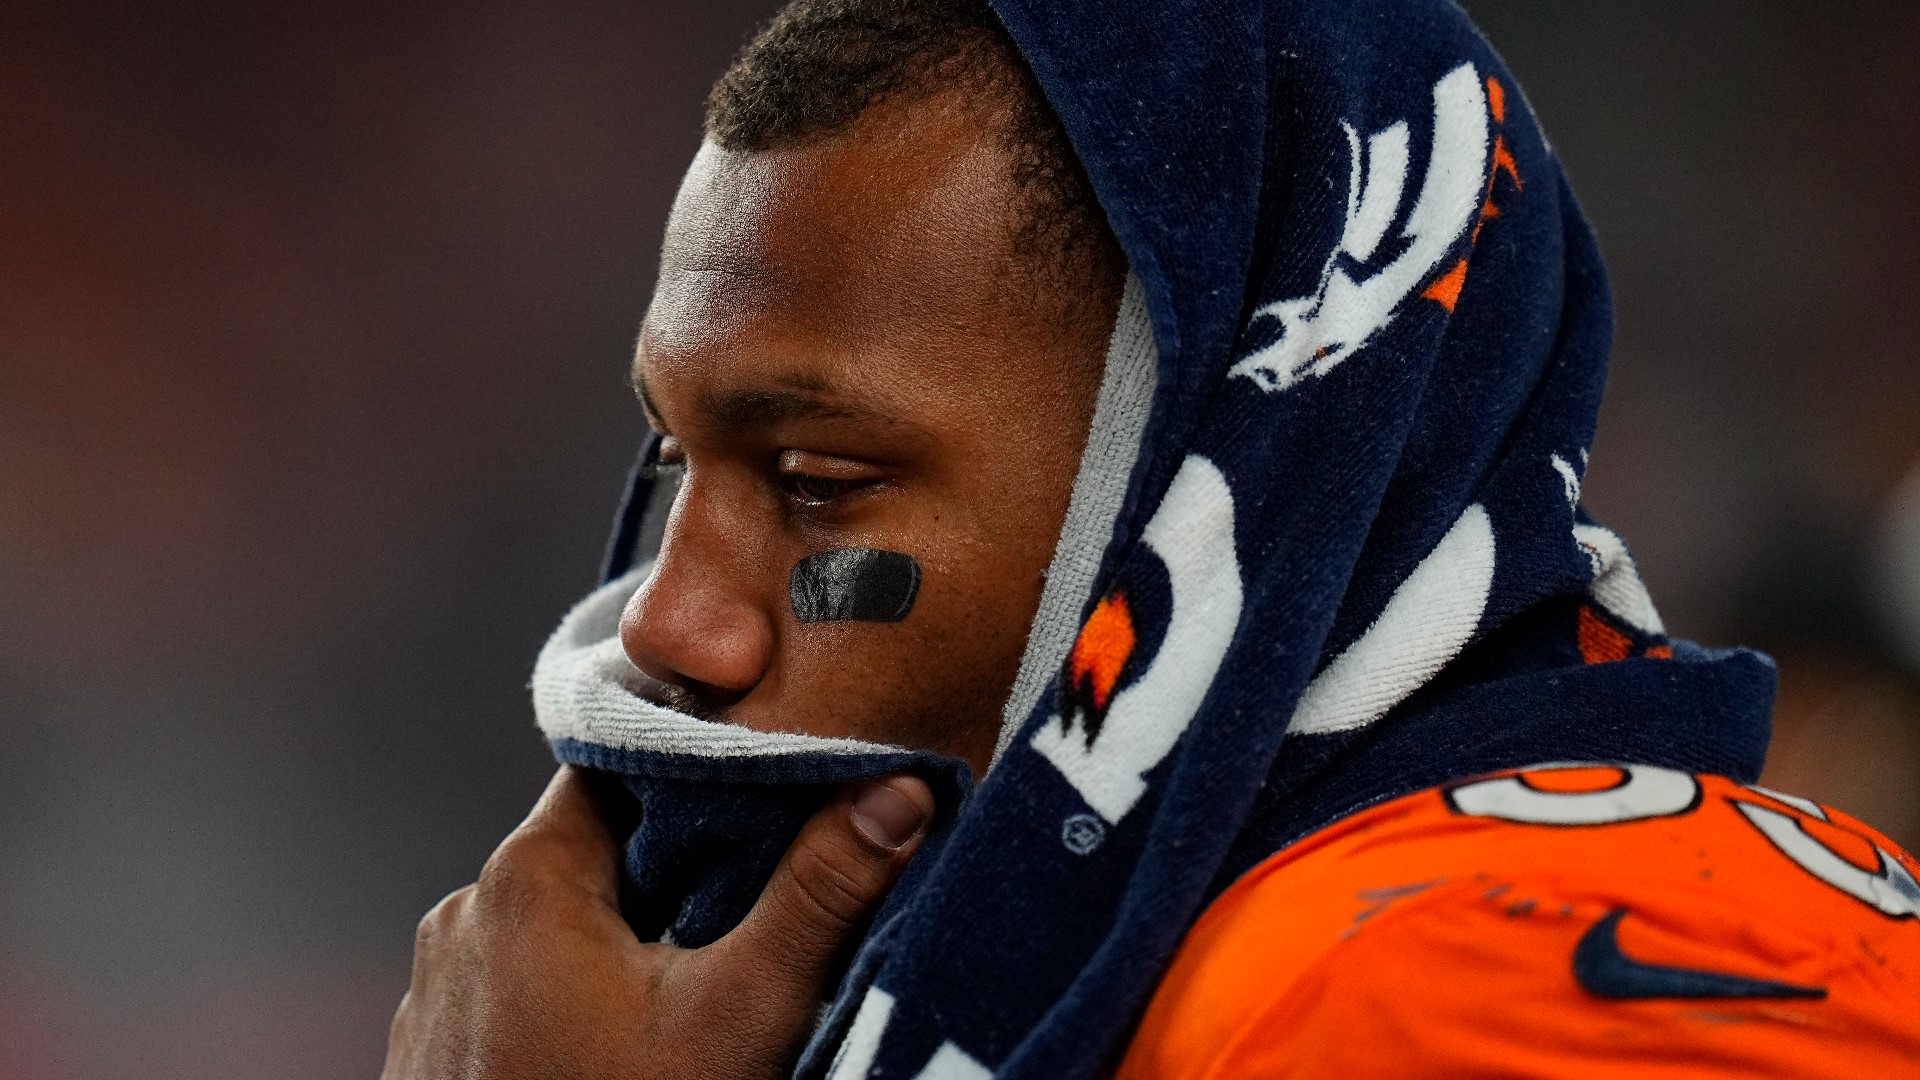 The Denver Broncos Pro Bowler had been charged with driving under restraint and expired license plates.